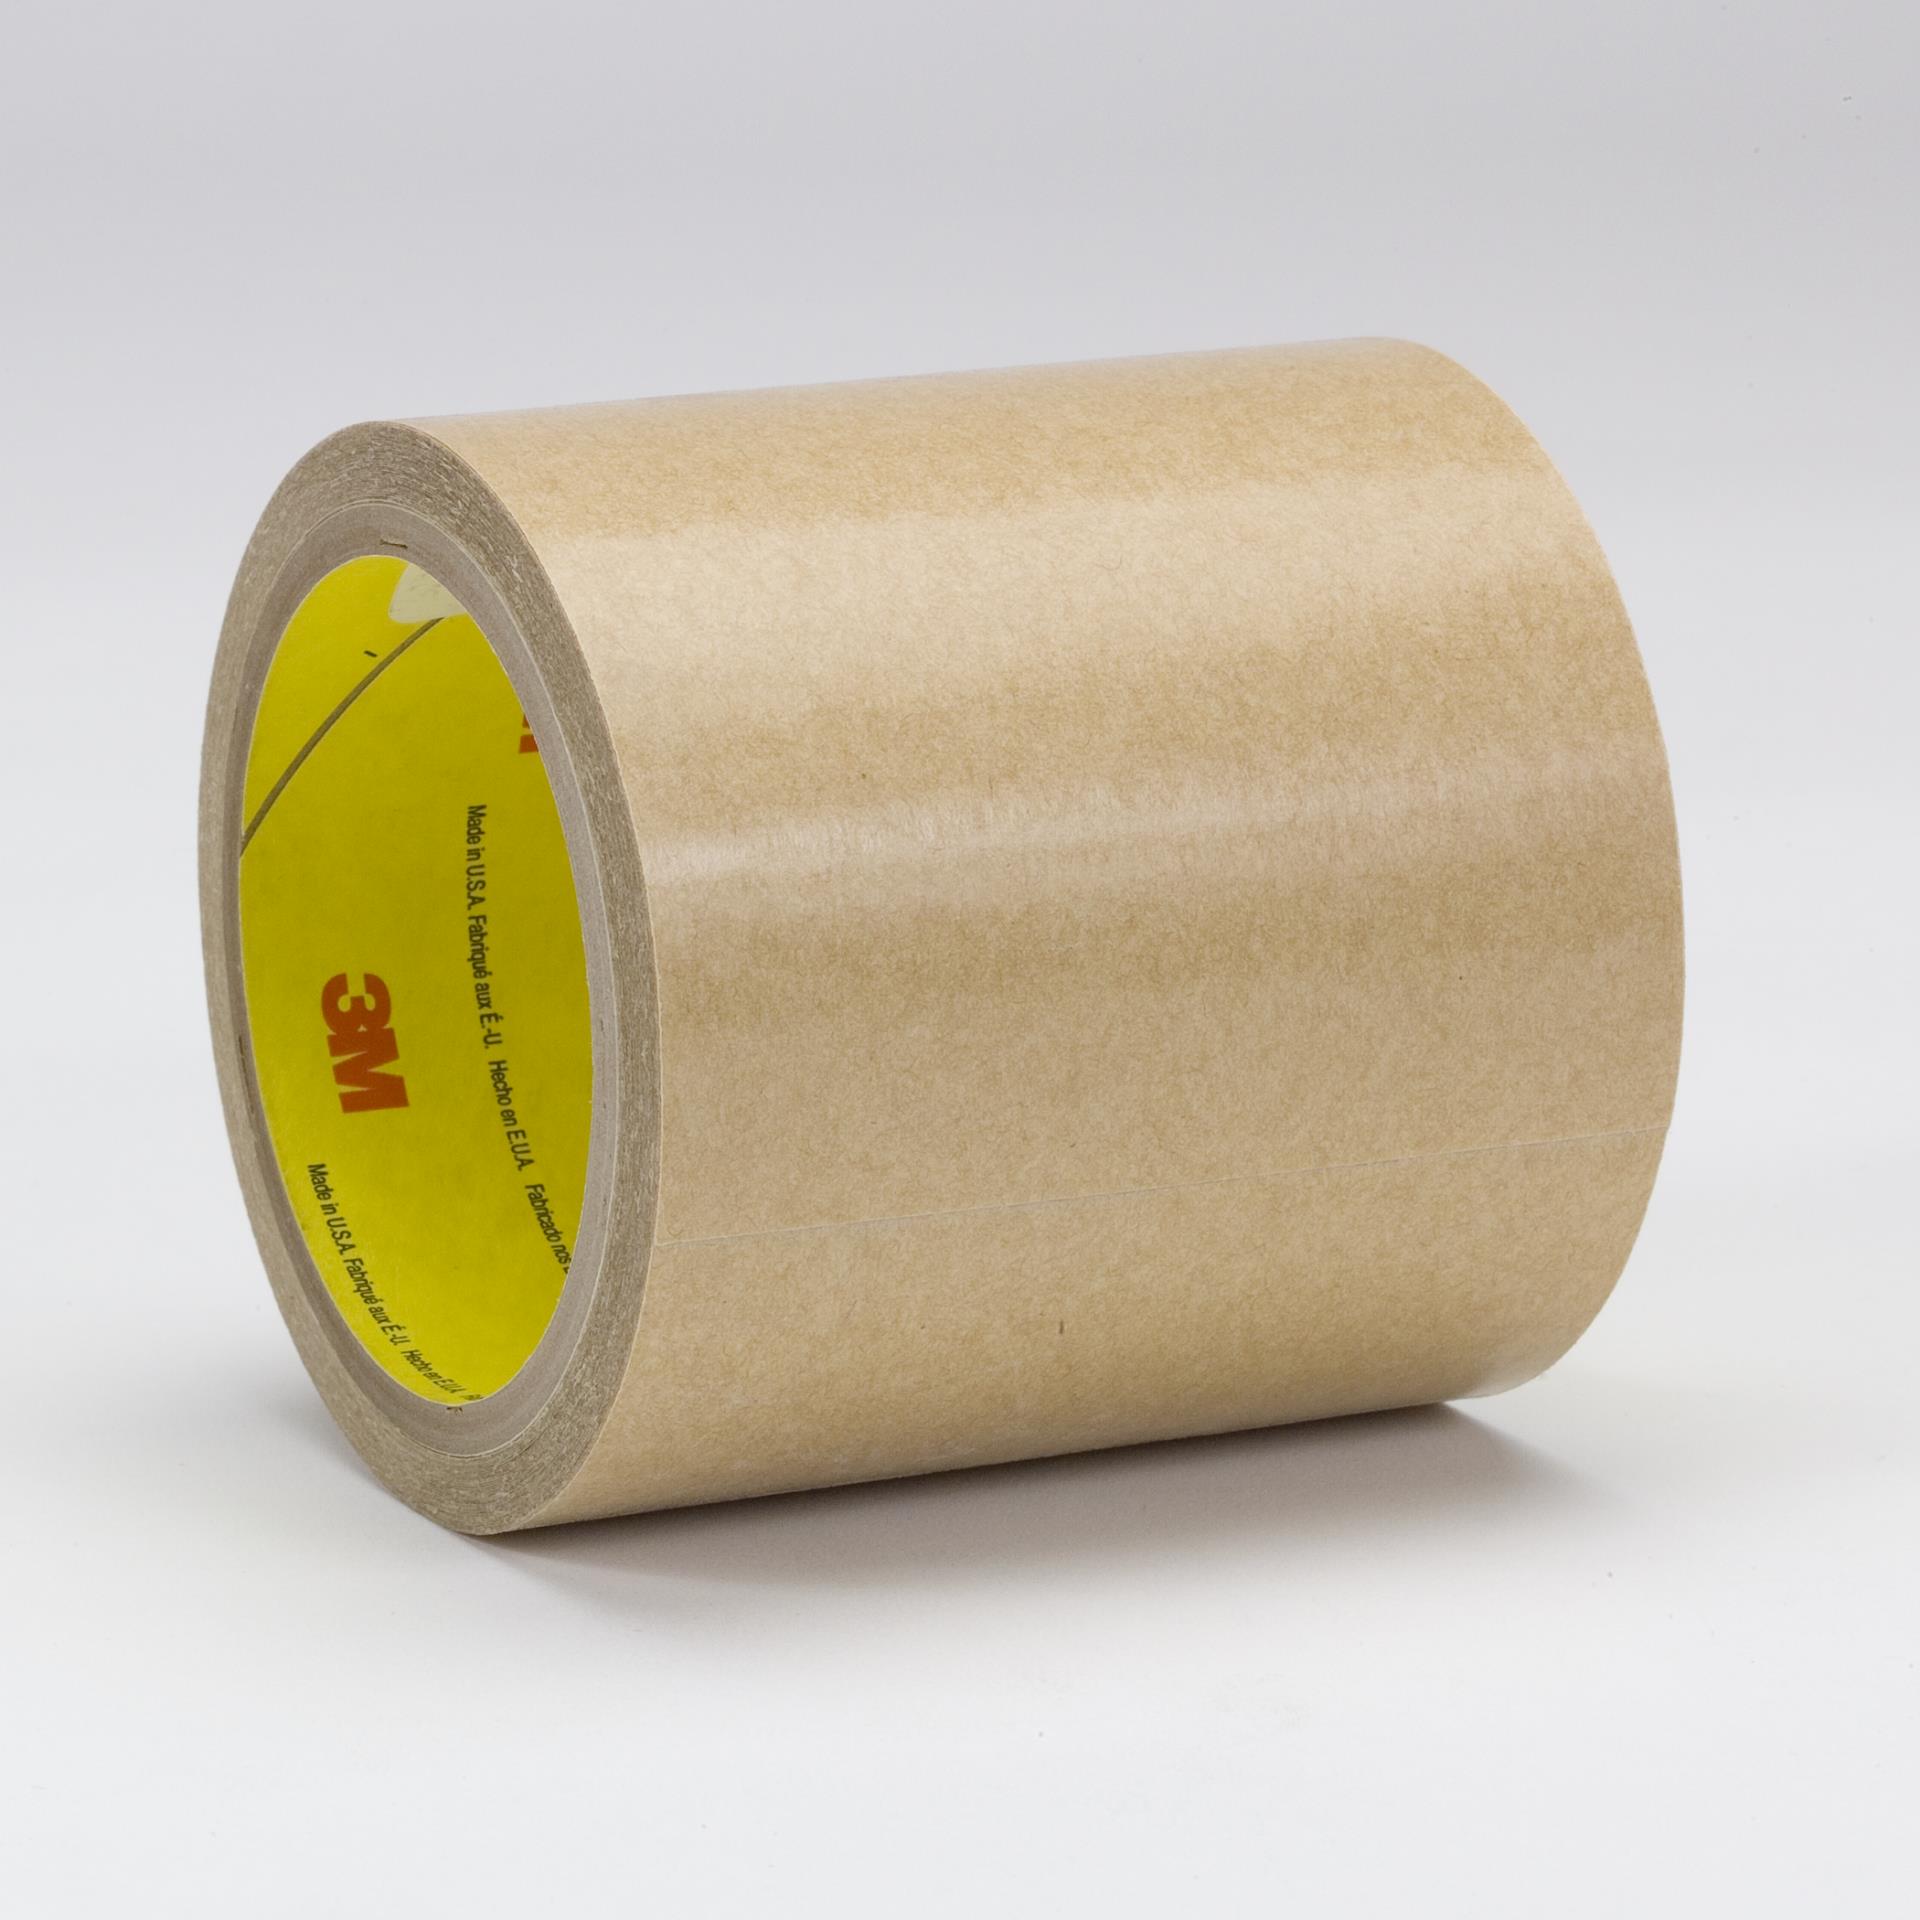 00021200117039 3M™ Adhesive Transfer Tape 950, Clear, 16 in x 60 yd,  Mil, 1/Case Aircraft products adhesive-transfer-tapes 9366894